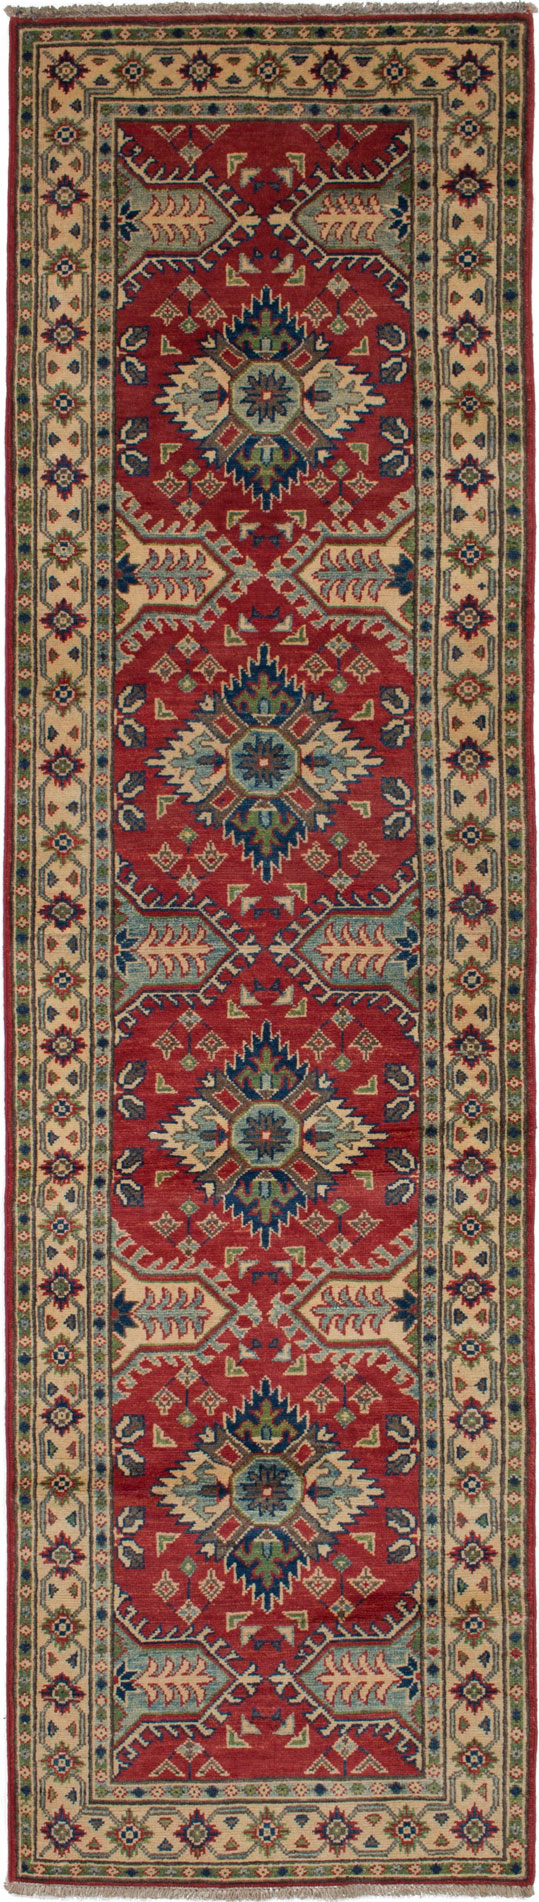 Hand-knotted Finest Gazni Red Wool Rug 2'8" x 9'9"  Size: 2'8" x 9'9"  